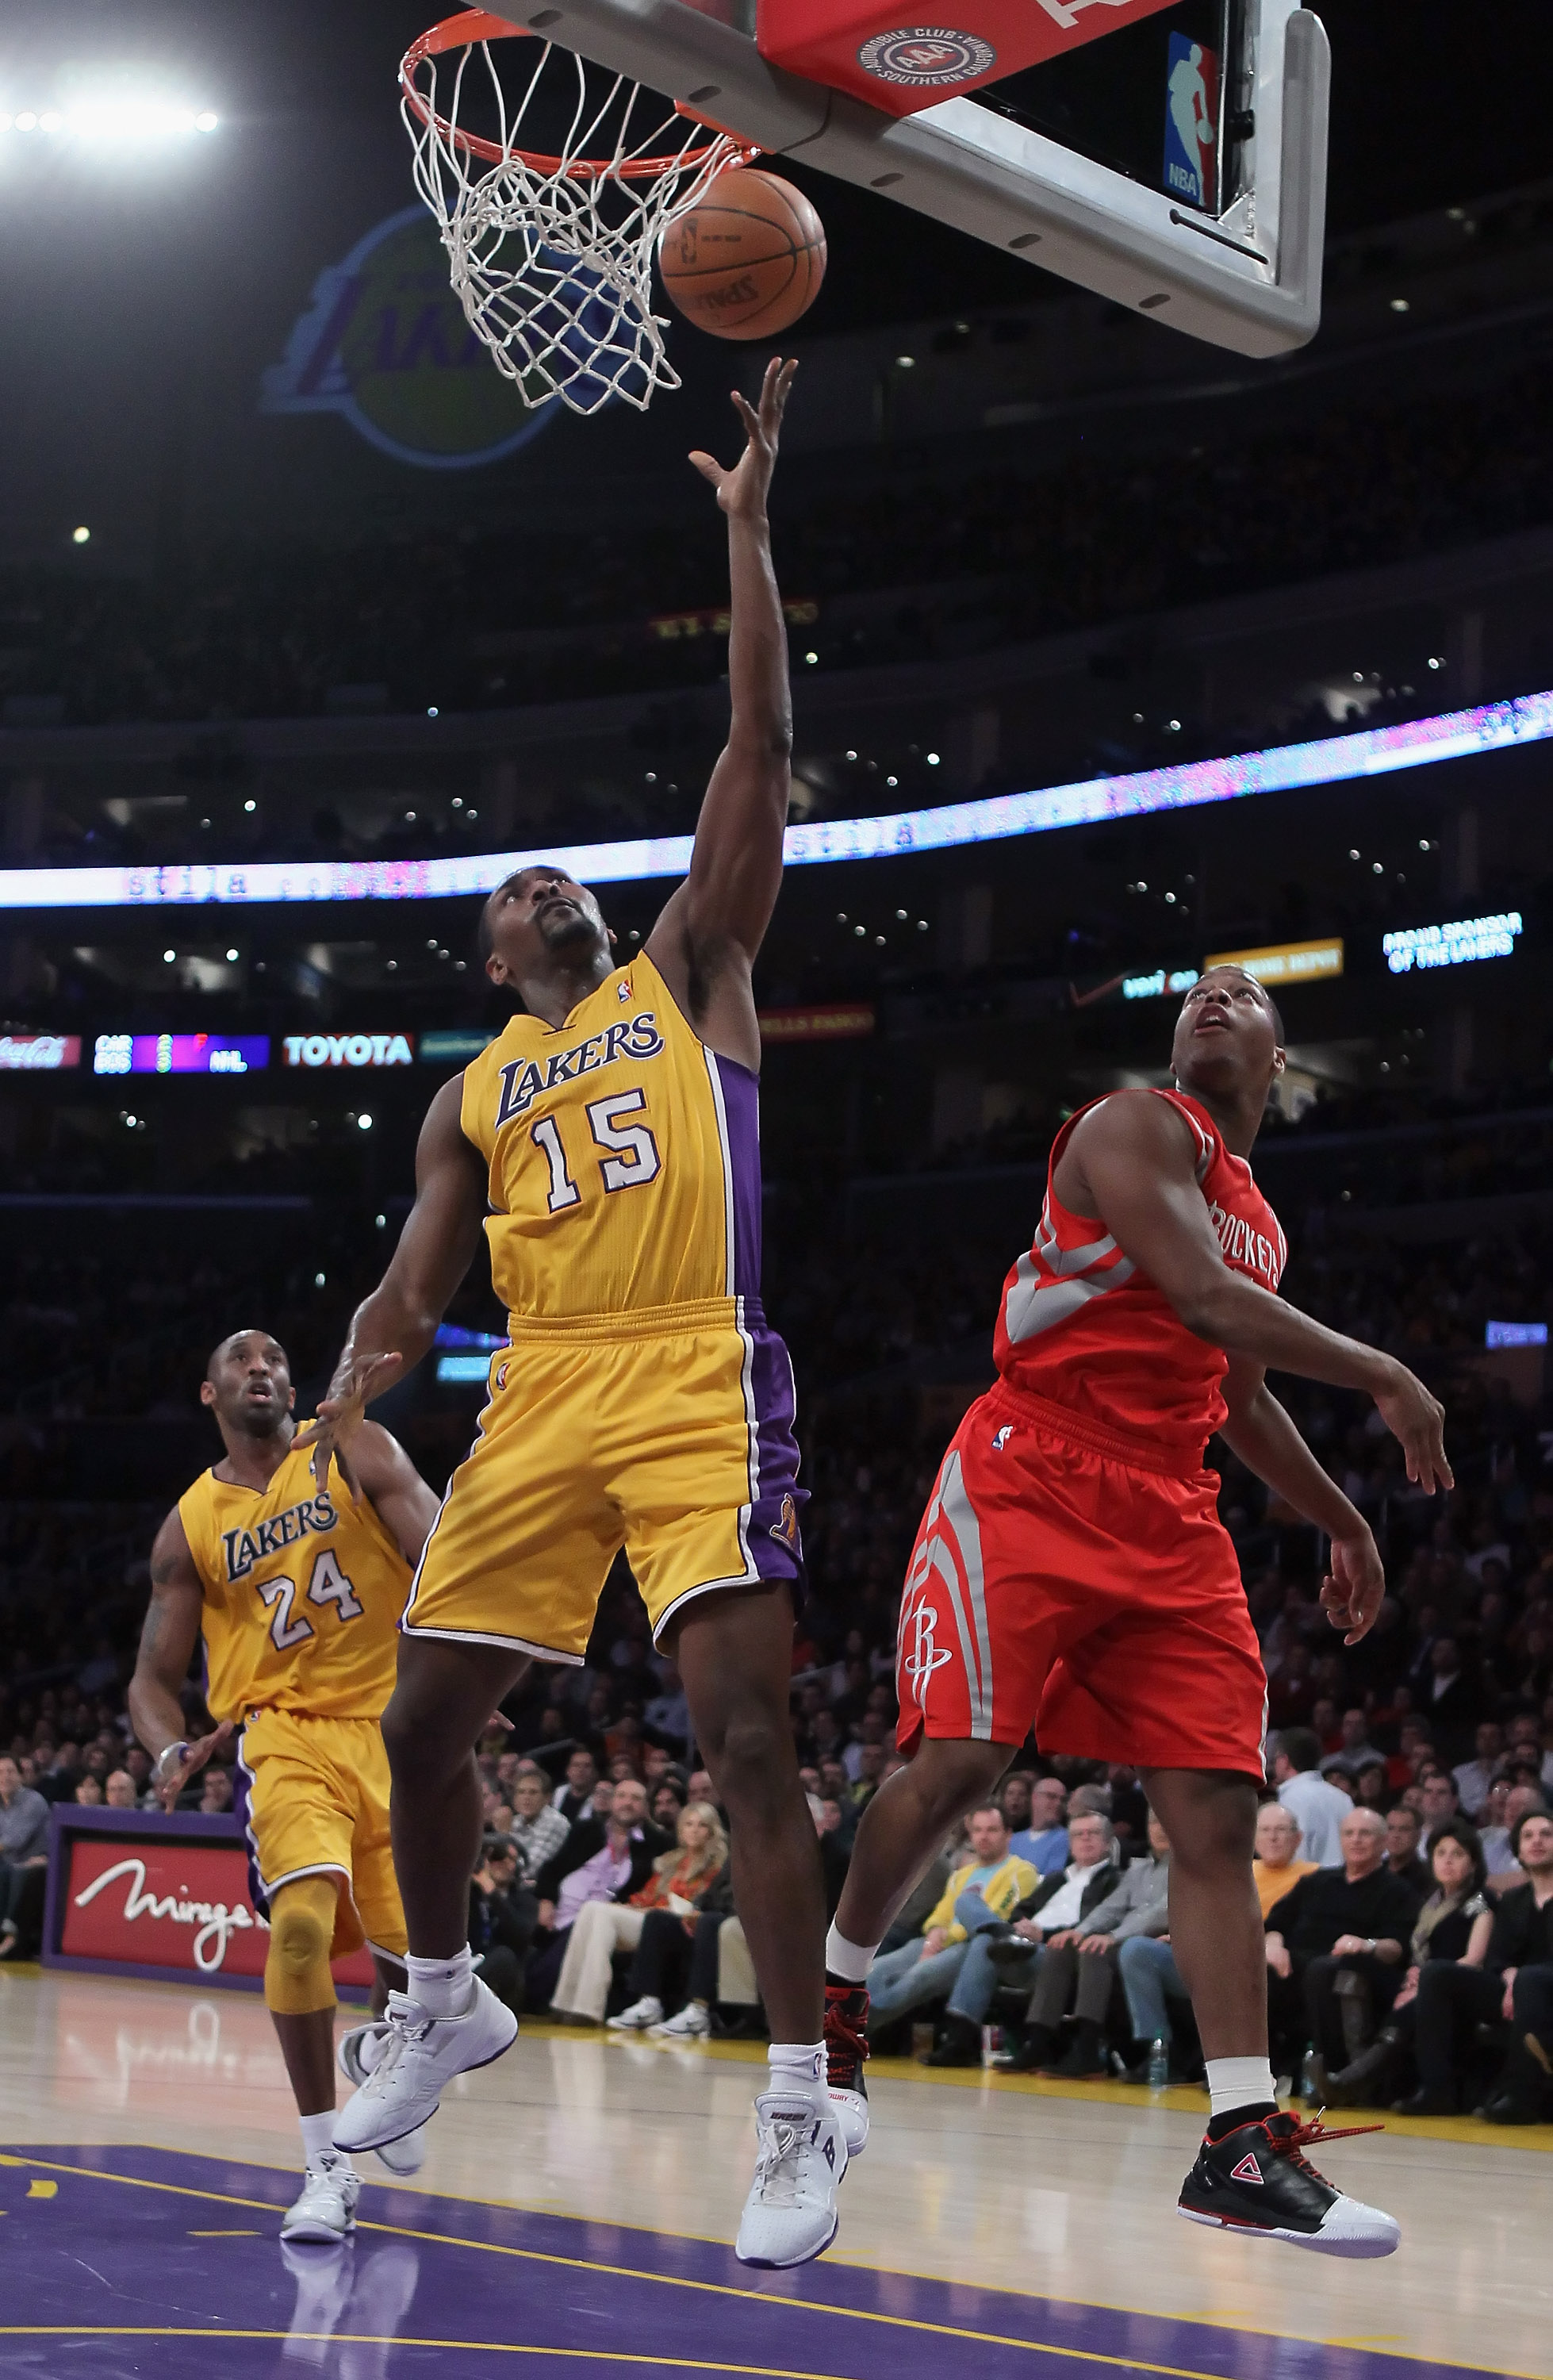 LOS ANGELES, CA - FEBRUARY 01:  Ron Artest #15 of the Los Angeles Lakers drives to the basket past Kyle Lowry #7 of the Houston Rockets in the first half at Staples Center on February 1, 2011 in Los Angeles, California. NOTE TO USER: User expressly acknow